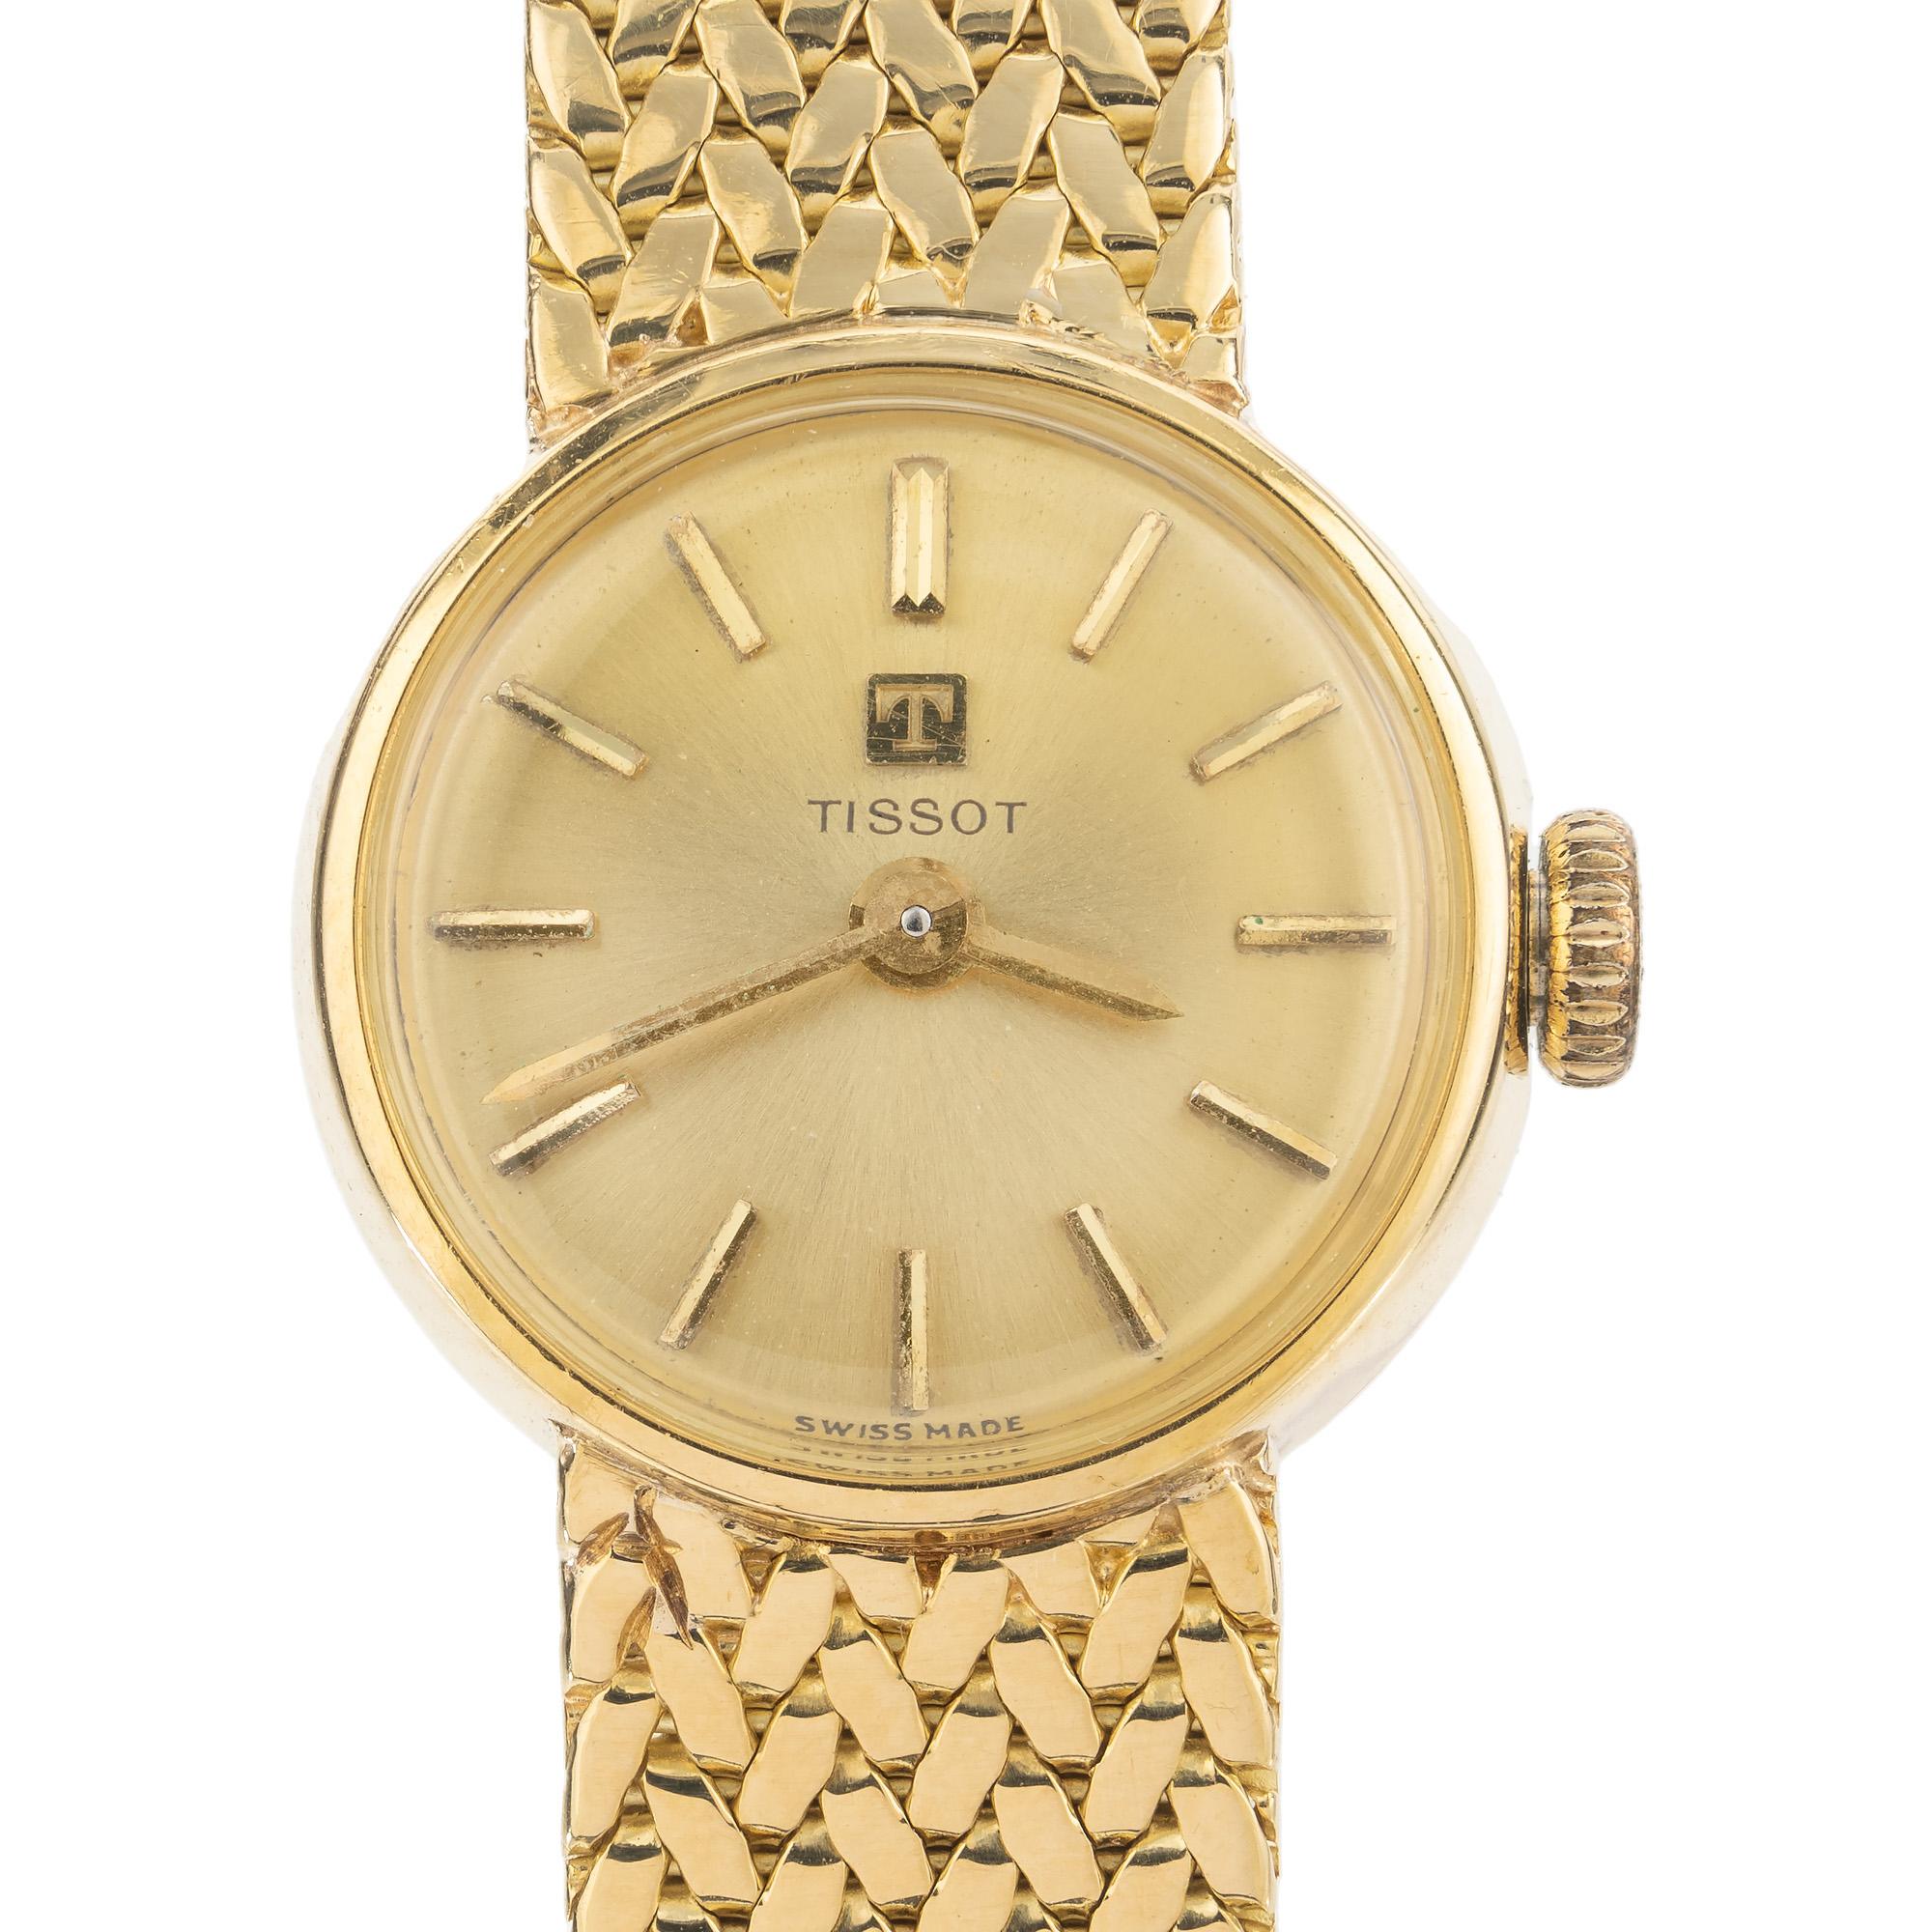 1980's Tissot yellow gold 17 jewel Ladies wristwatch is an exquisite timepiece that perfectly combines elegance and functionality. The yellow gold-tone dial boasts a minimalist aesthetic, with slim hour markers and luminous hands that make it easy